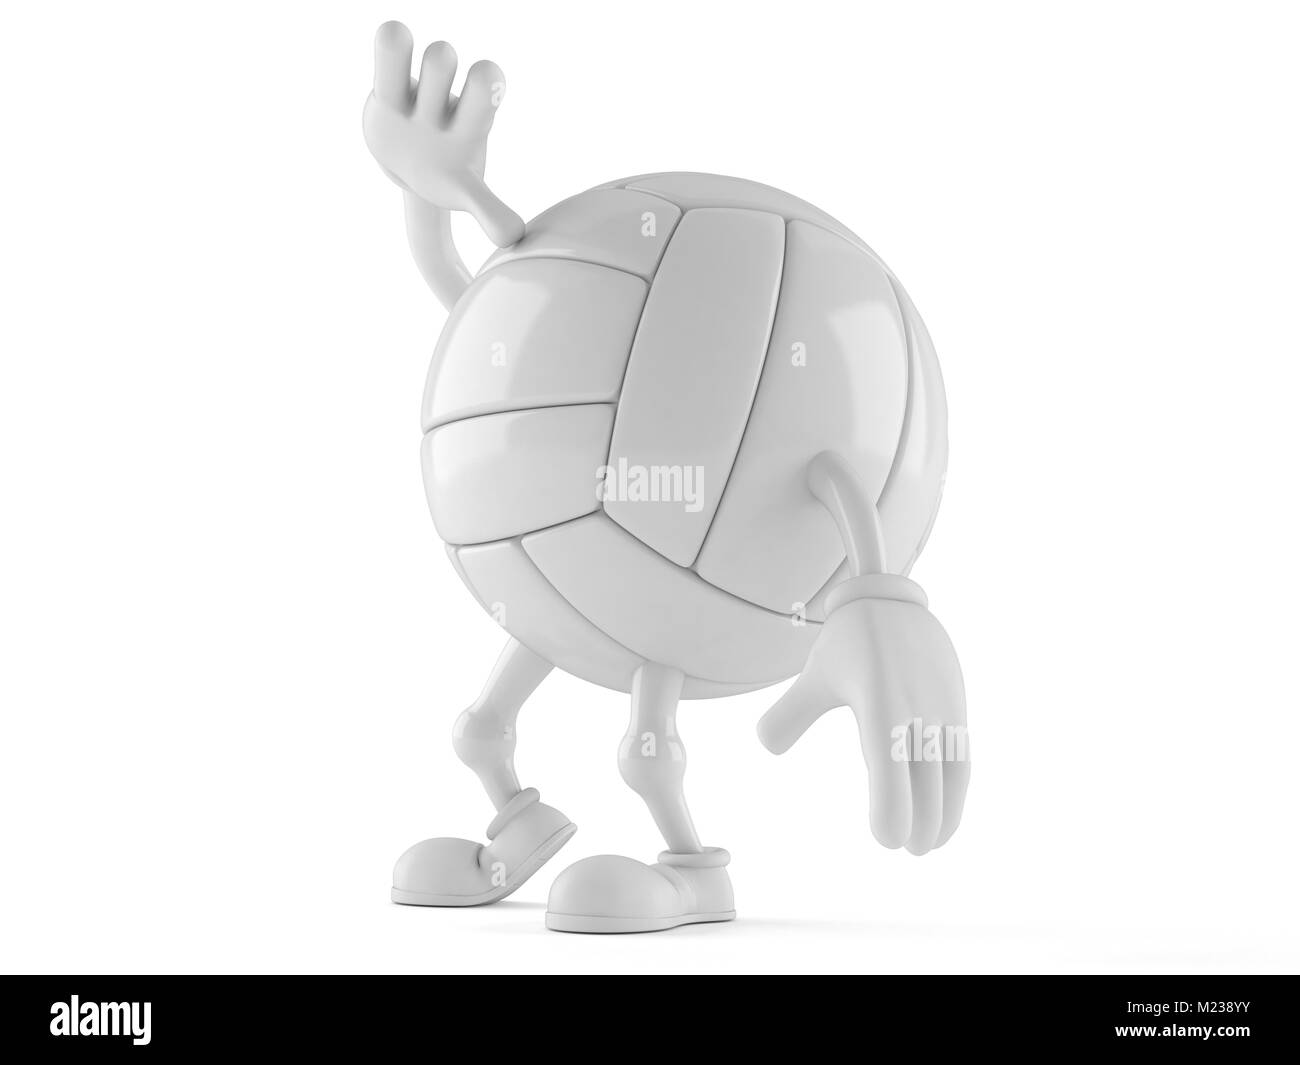 Volleyball character isolated on white background Stock Photo